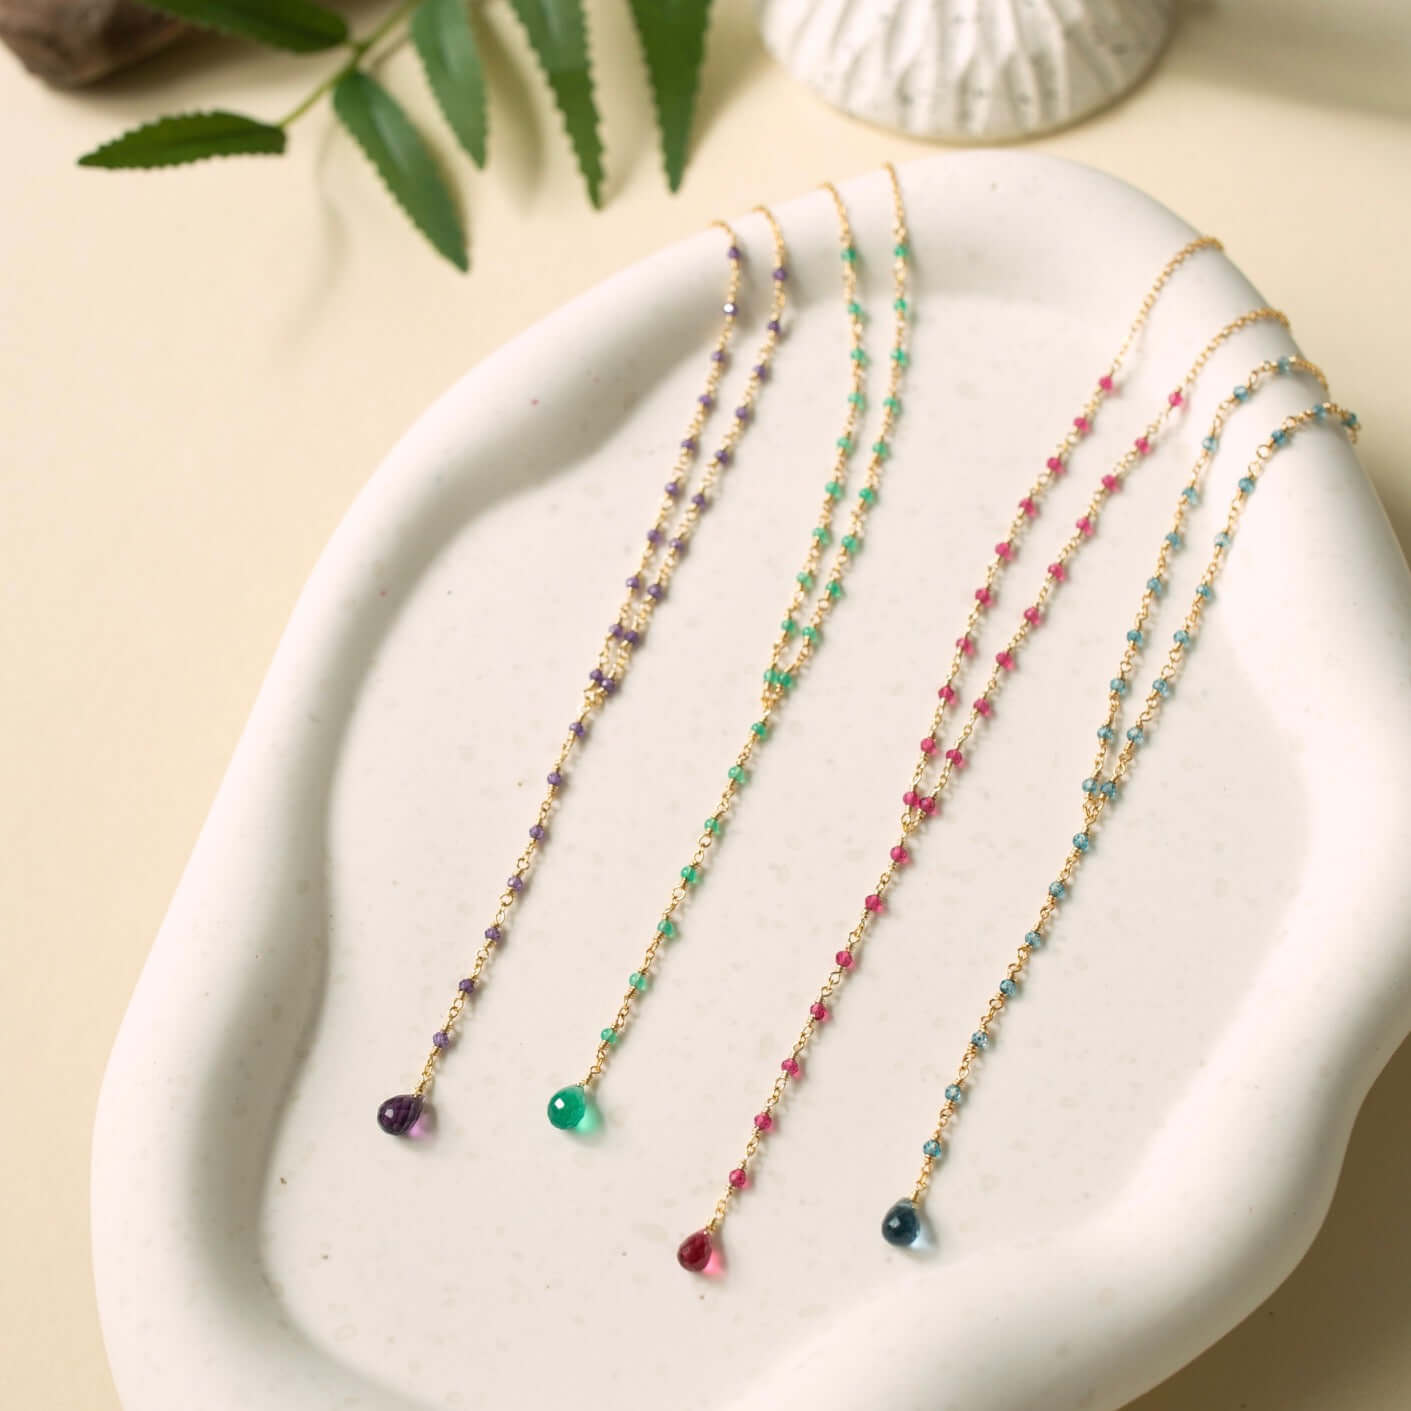 Against a rustic clay plate backdrop, lolite, amethyst, pink tourmaline quartz, and green onyx necklaces unveil their distinct beauty in a charming display of natural elegance